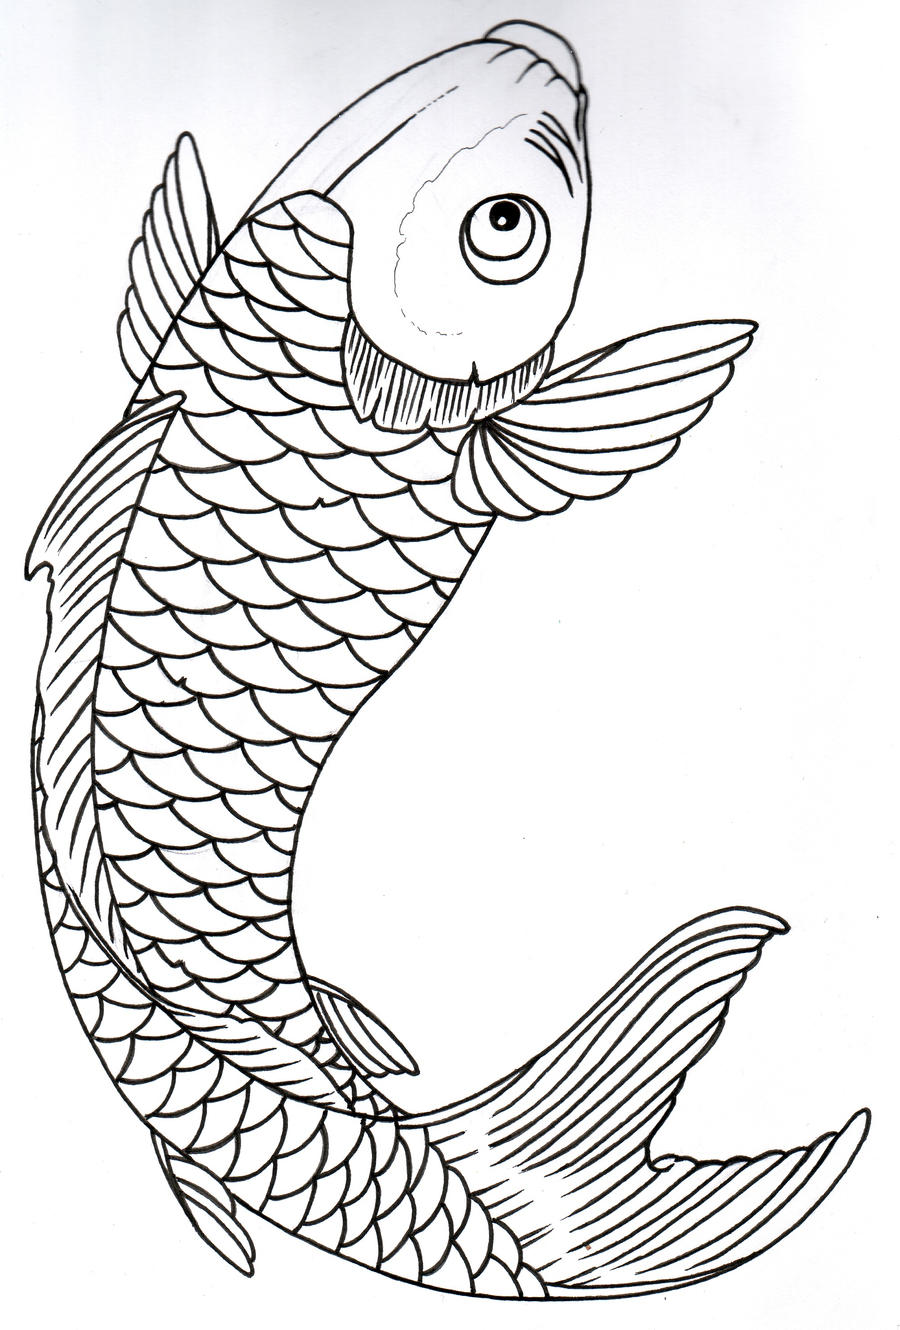 Fish drawings, Fish and Free printable on Pinterest